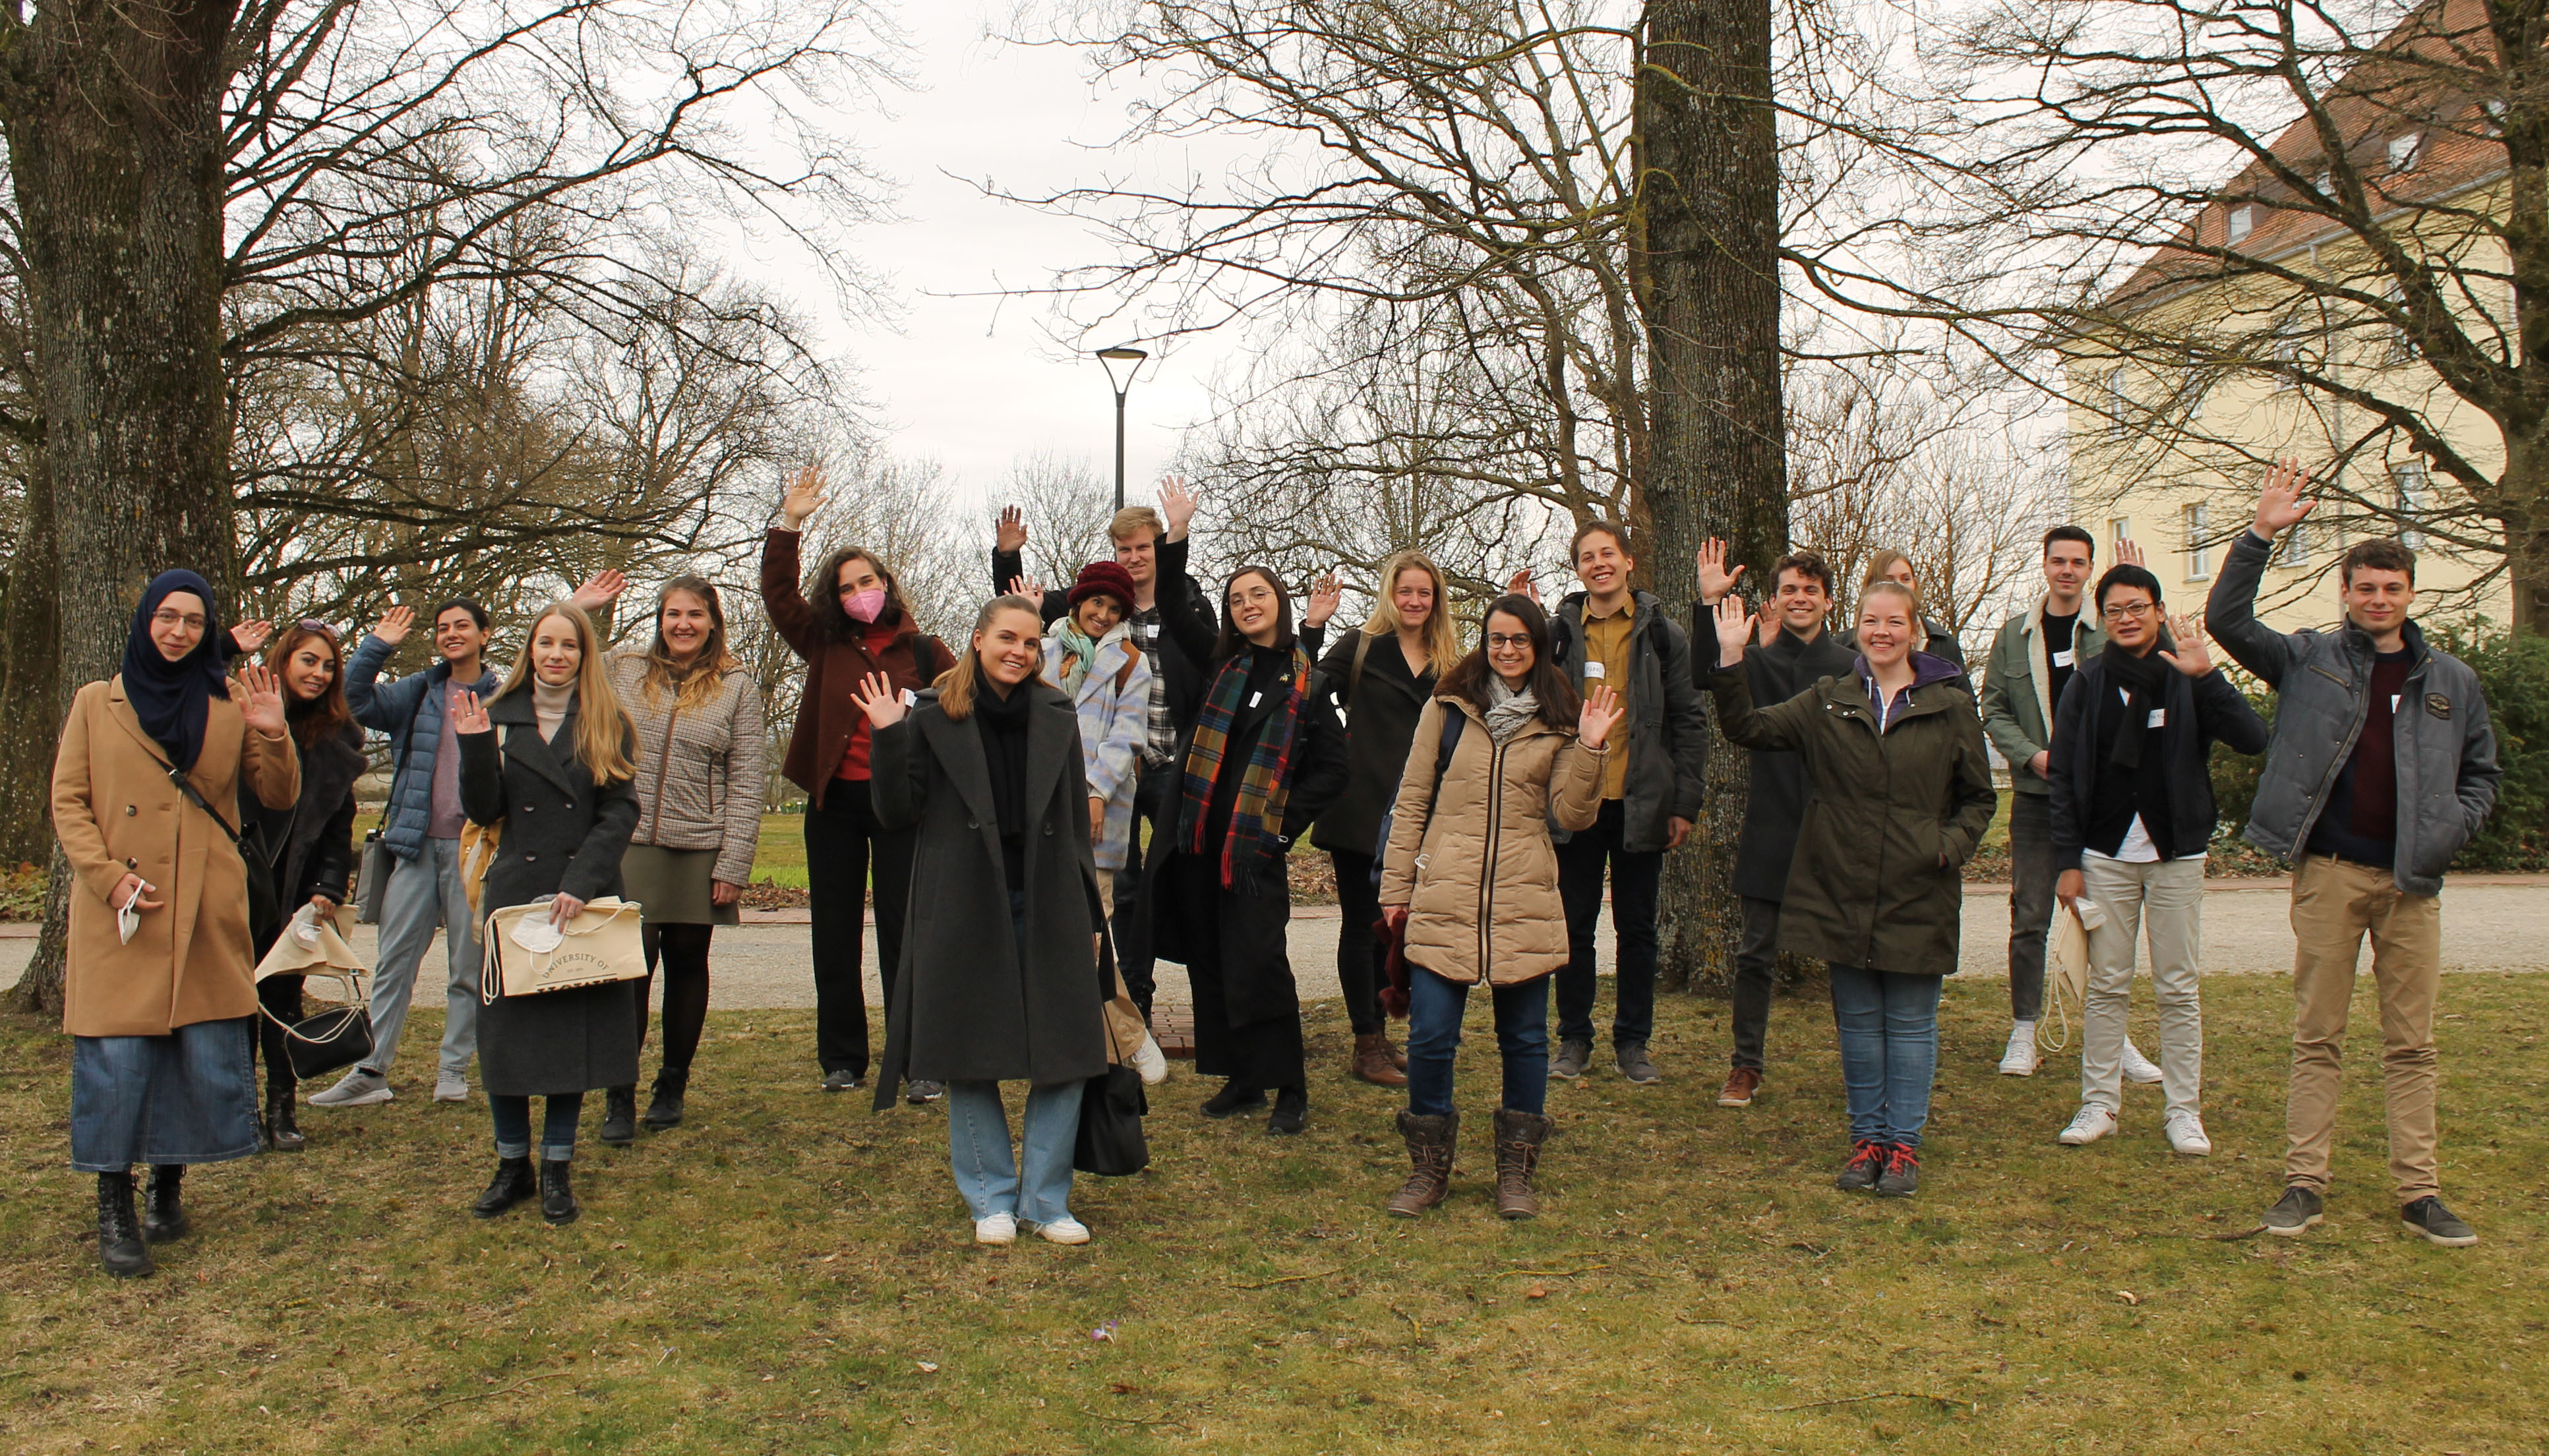 Photo group of students, waving, on lawn, background trees and bushes